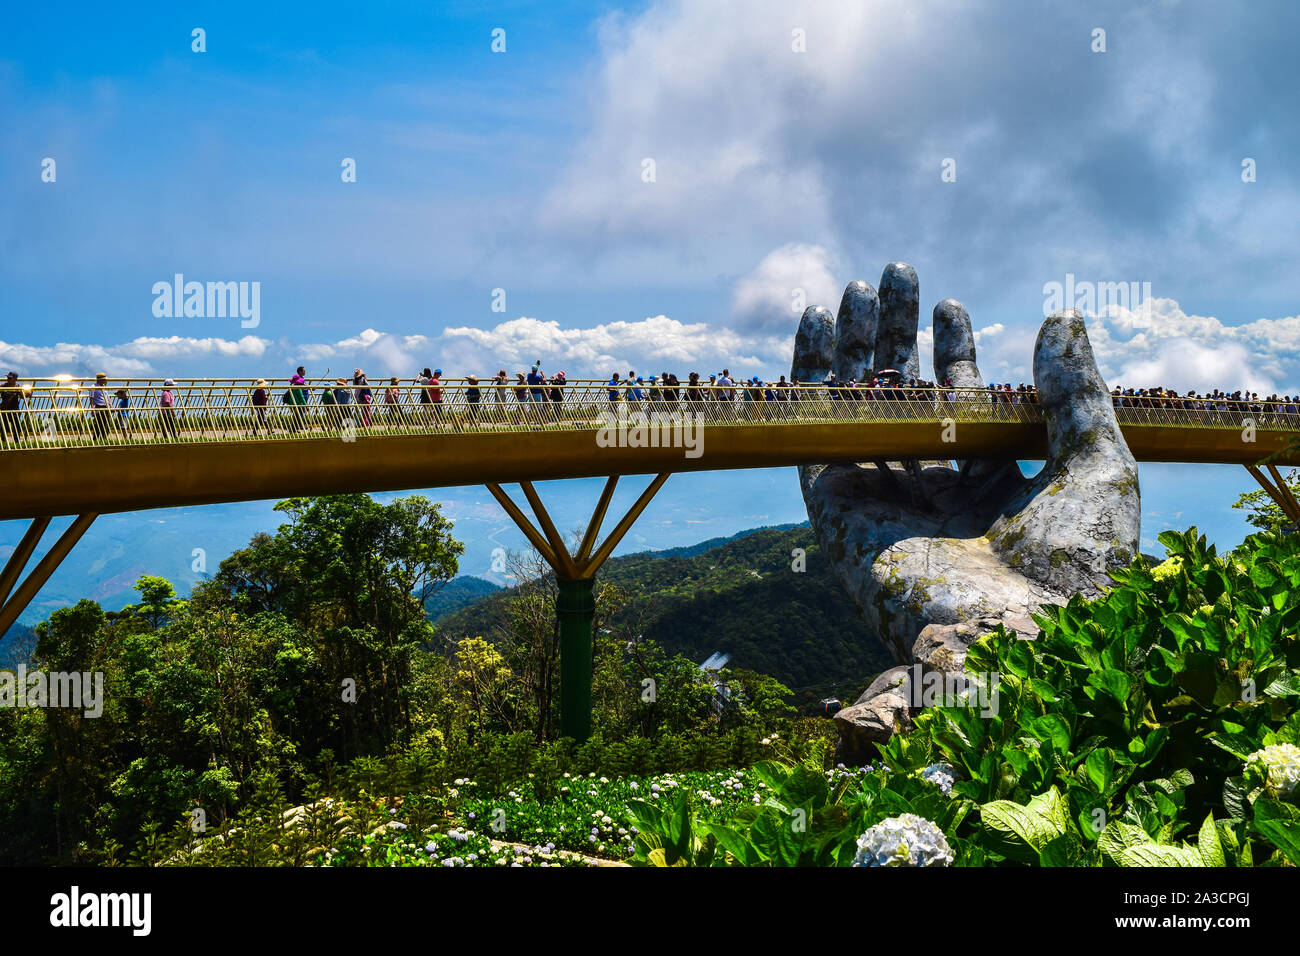 Danang, Vietnam - April 6, 2019: The Golden Bridge is lifted by two giant hands in the tourist resort on Ba Na Hill in Danang, Vietnam. Ba Na Hill mou Stock Photo